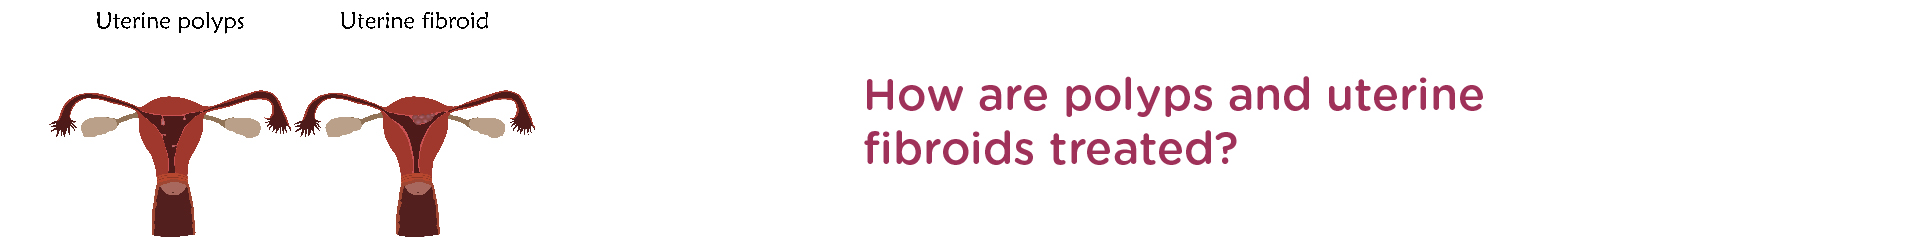 How is polyps and uterine fibroids treated?